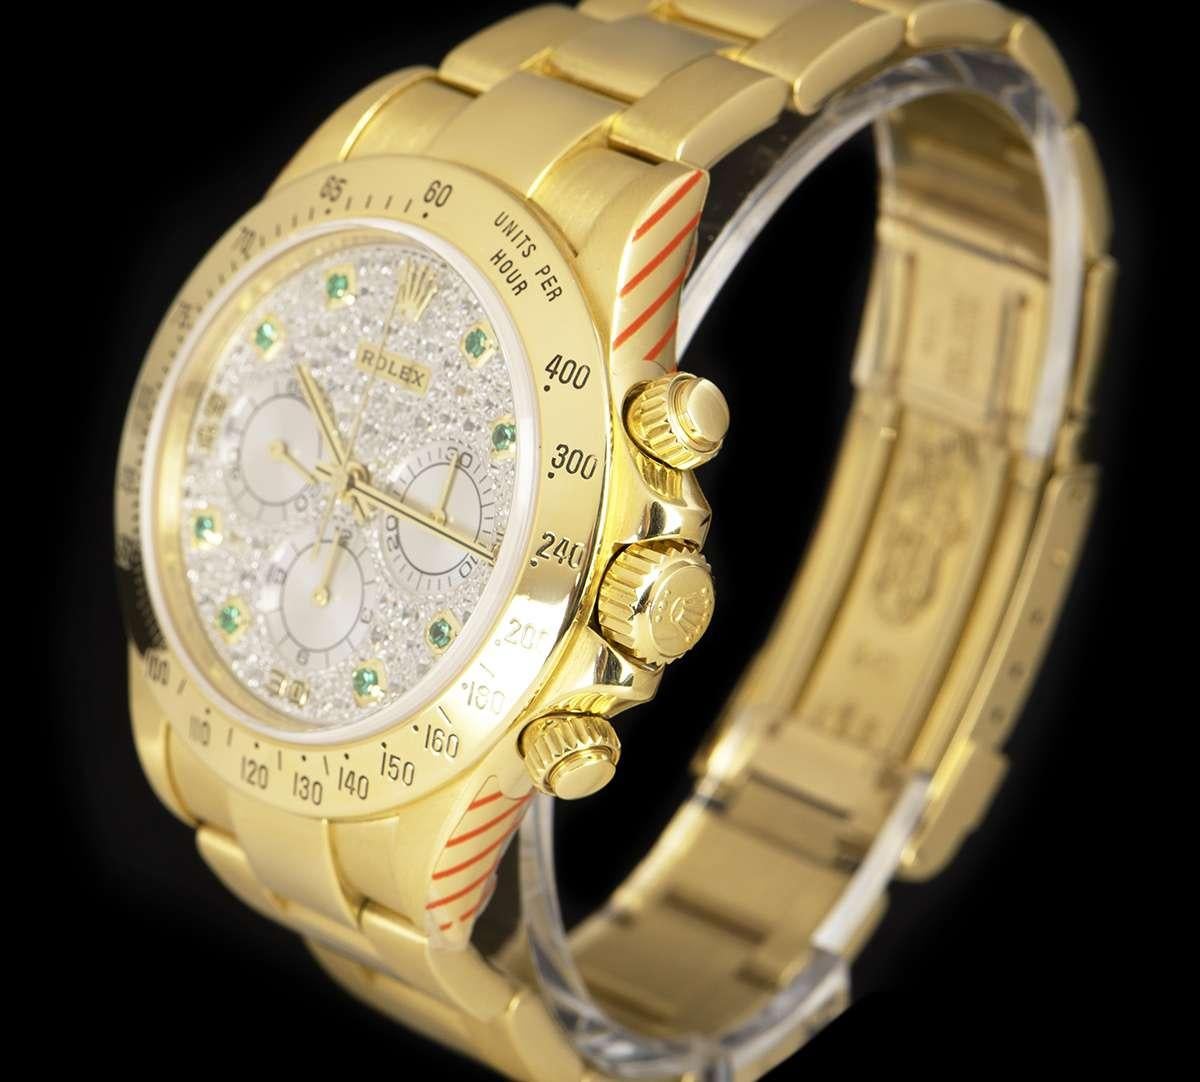 An 18k Yellow Gold Oyster Perpetual Zenith Movement Cosmograph Daytona Gents Wristwatch, pave diamond dial with 8 applied round brilliant cut emerald hour markers and white gold sub-dials, 30 minute recorder at 3 0'clock, 12 hour recorder with at 6